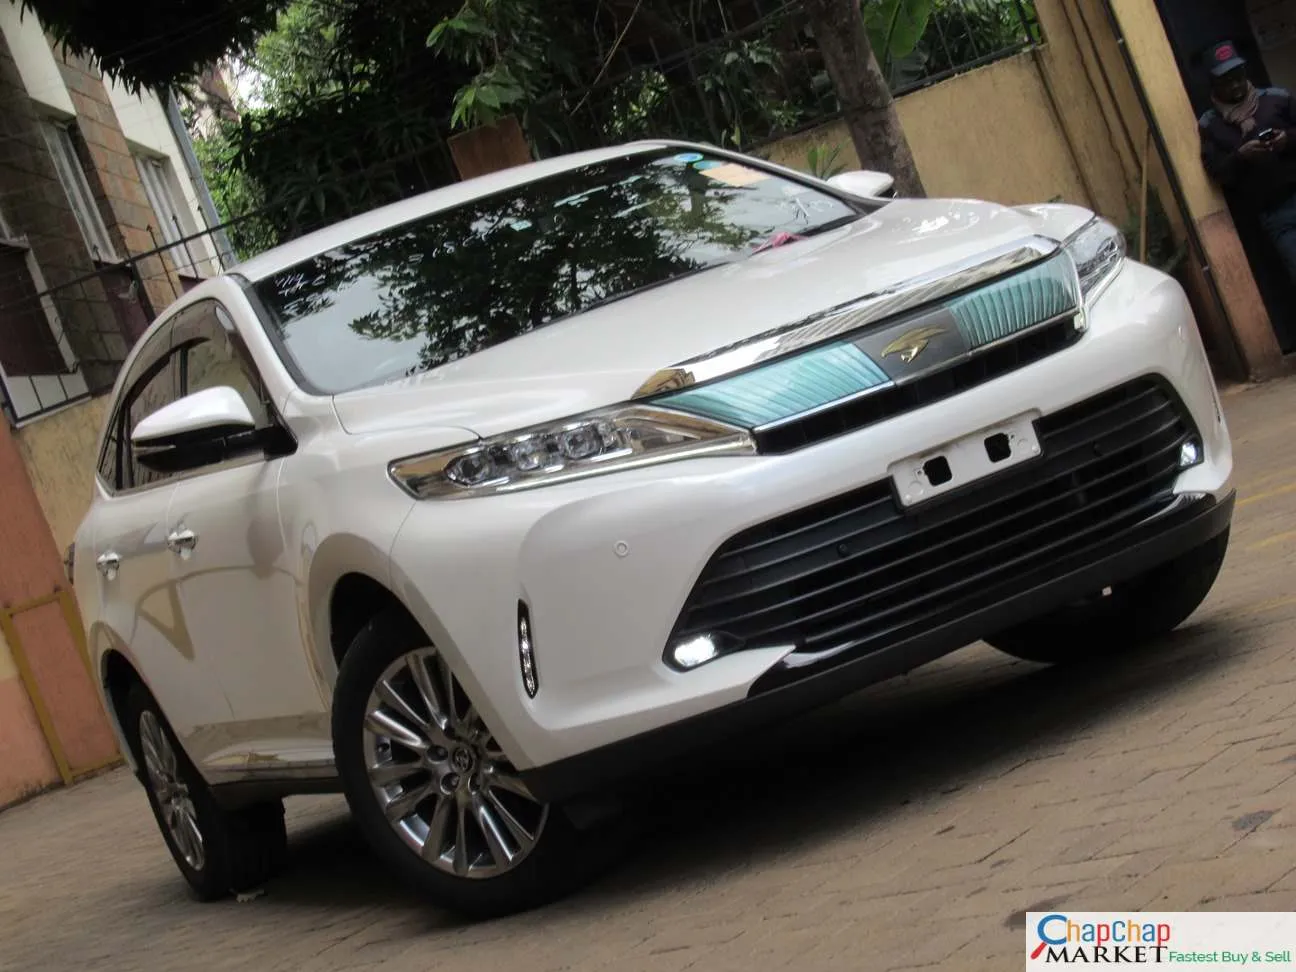 Toyota Harrier Just arrived You Pay 30% Deposit Trade in OK EXCLUSIVE Hire purchase Trade in ok